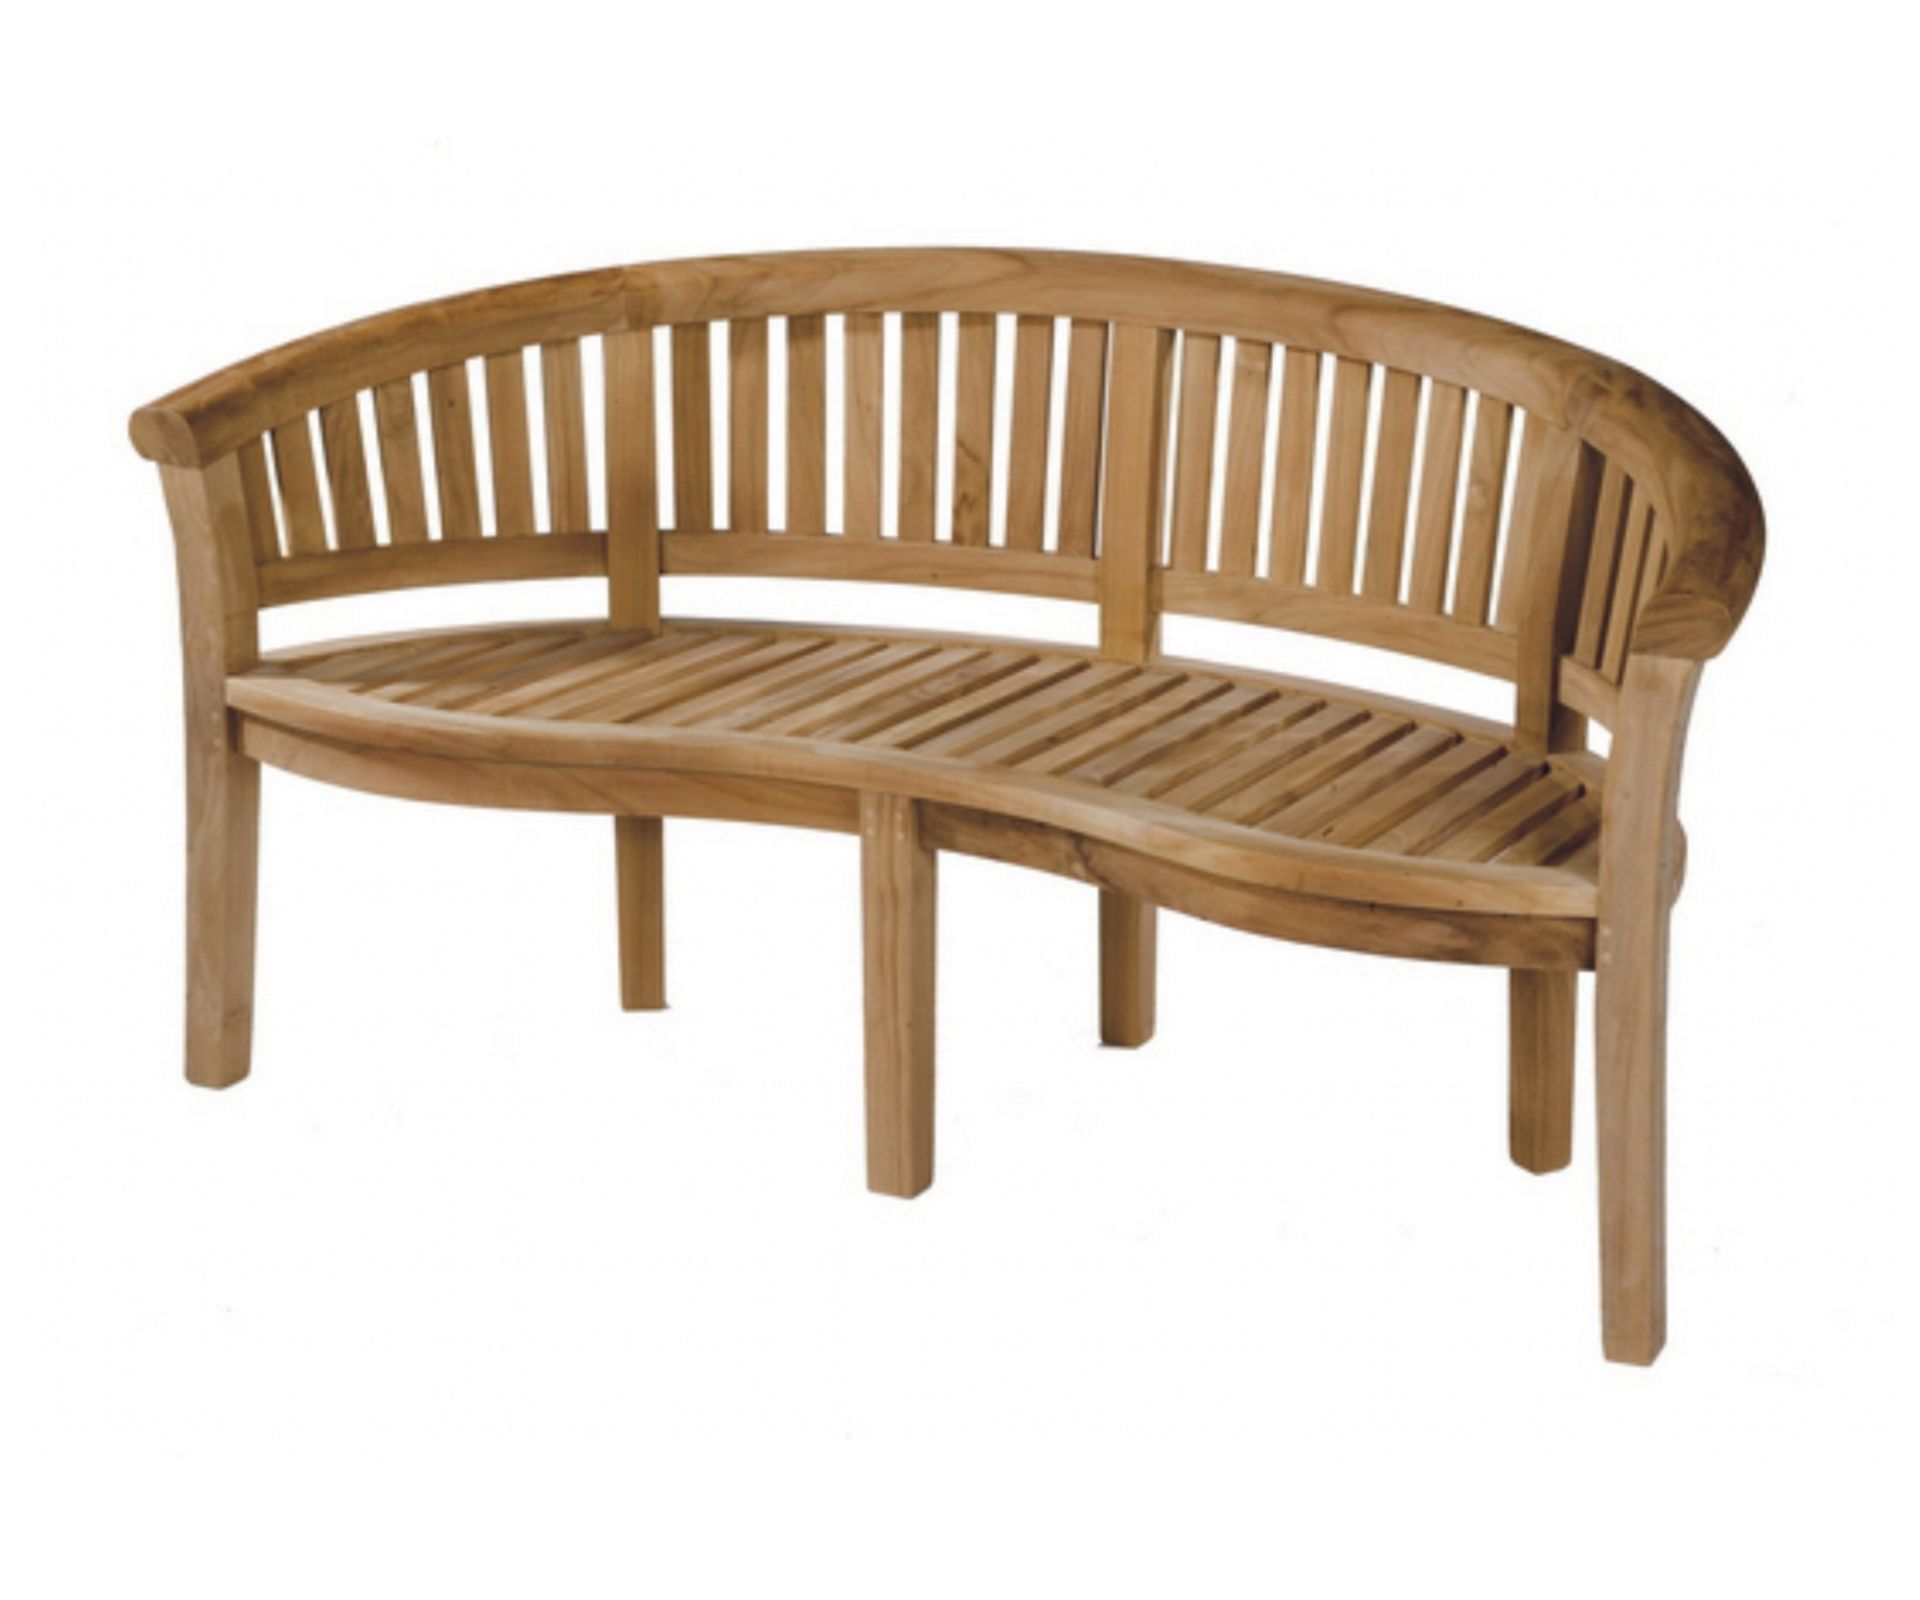 BOXED NEW SOLID TEAK PEANUT BENCH